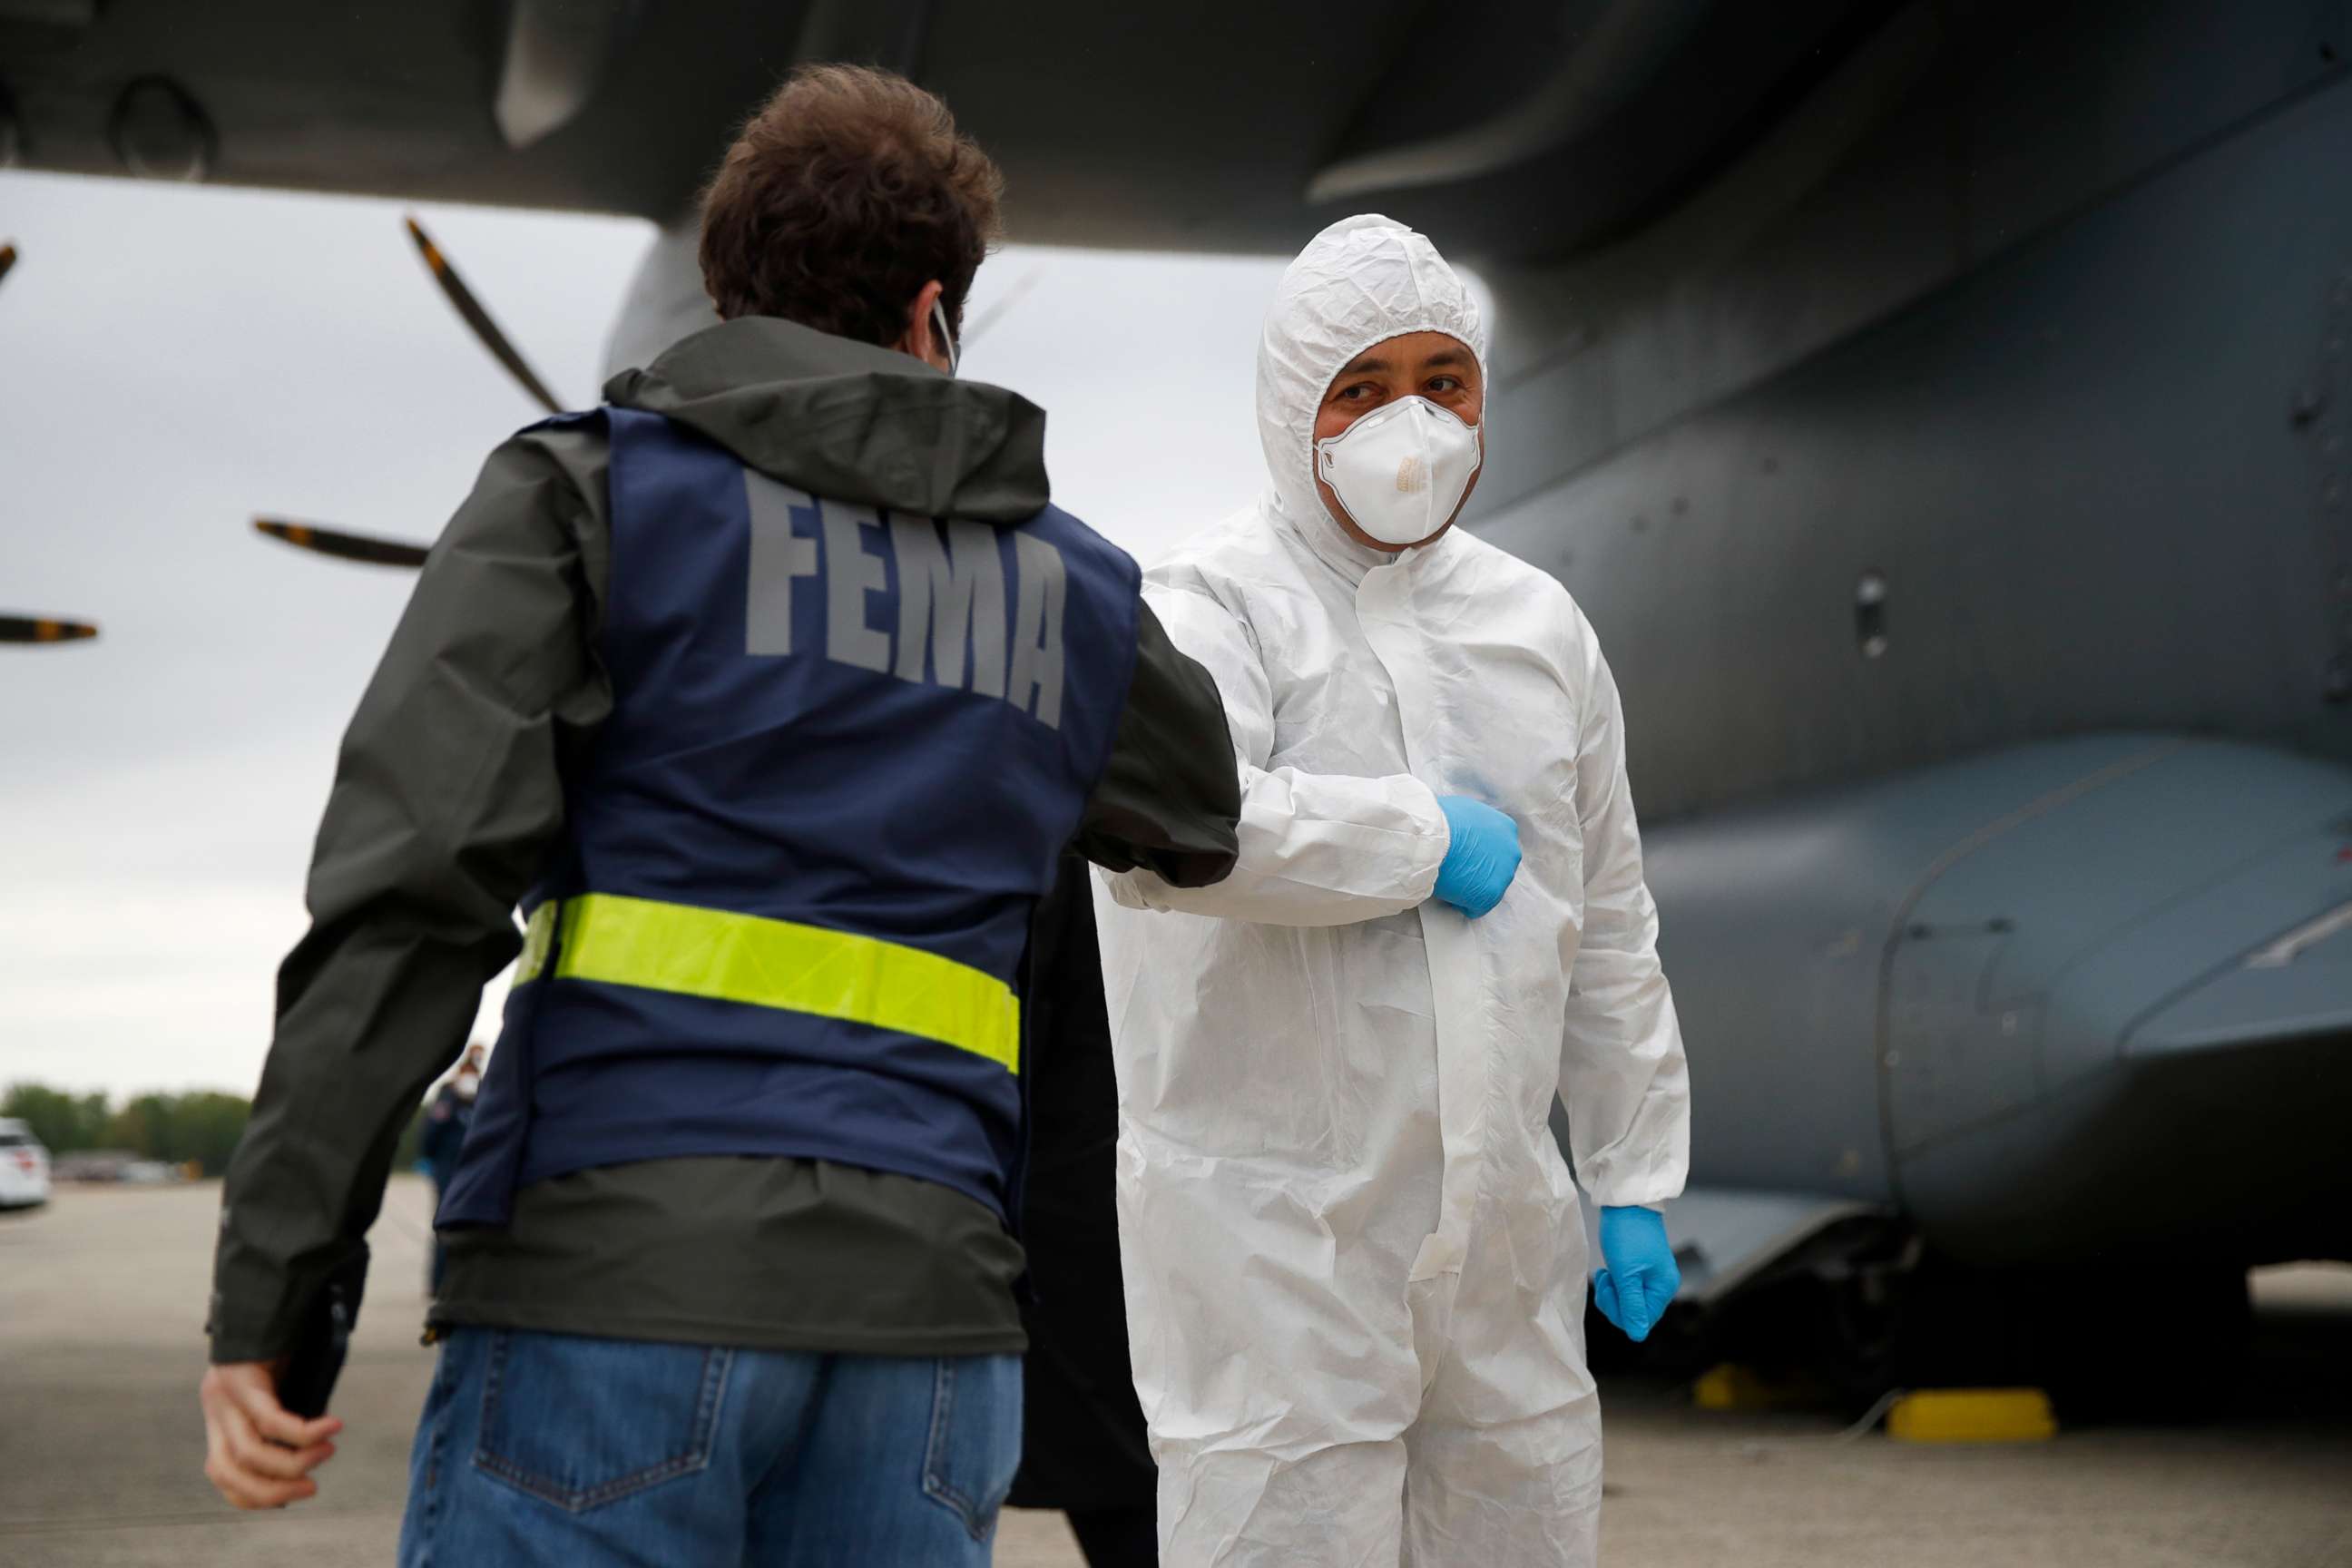 PHOTO: A Turkish military flight crew member bumps elbows with a FEMA worker as crews unload a donation of medical supplies from Turkey, April 28, 2020, at Andrews Air Force Base, Md.